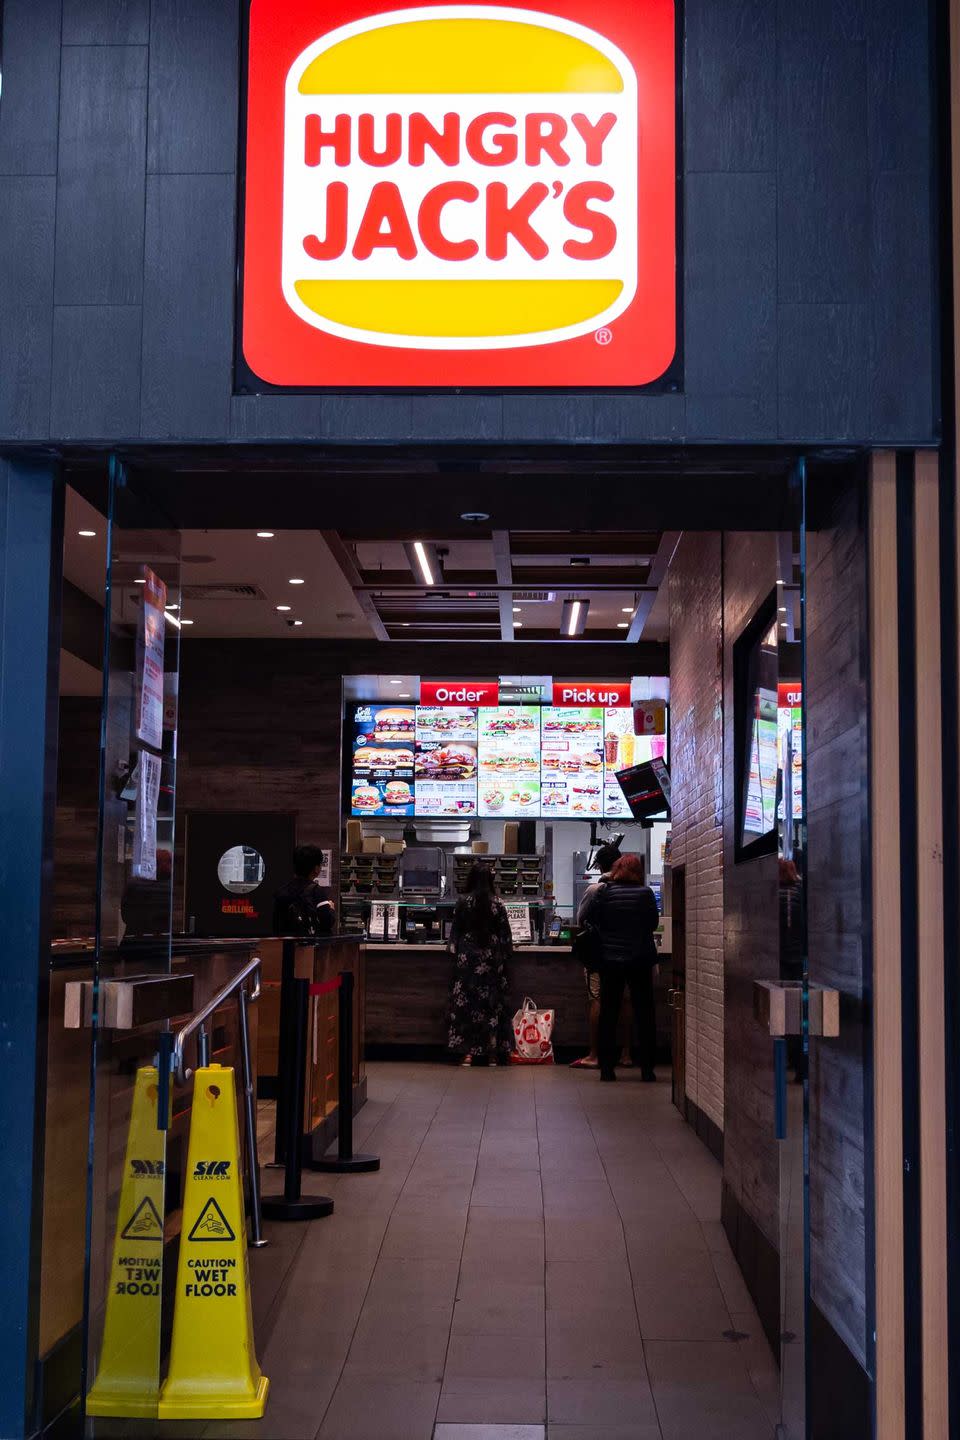 <p>While it’s literally the same Burger King taste, there was already an existing restaurant with the same name down under. The then-parent company, Pillsbury, gave franchisee Jack Cowin name options to pick from. He chose Hungry Jack, which for Australia seems very on trend and just as successful as the Burger King we know and love here in the states. </p>